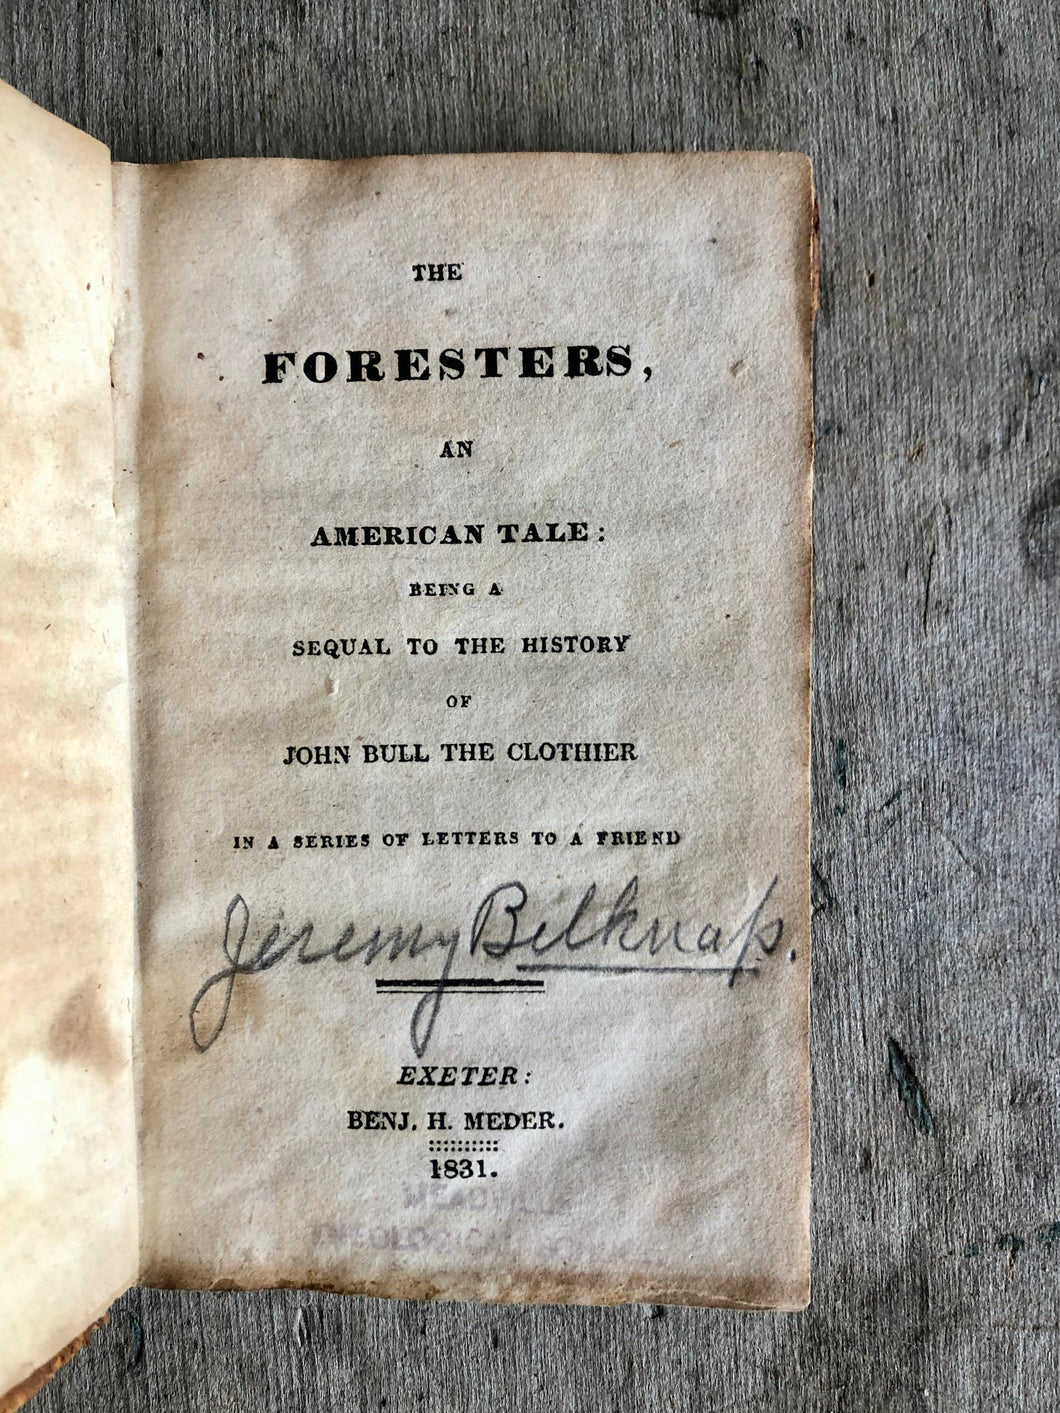 The Foresters, An American Tale: Being a Sequel to the History of John Bull the Clothier by Jeremy Bulknap. Bound with Boston, Two Hundred  Years Ago, Or The Romantic Story of Miss Ann Carter and the Celebrated Indian Chief Thundersquall